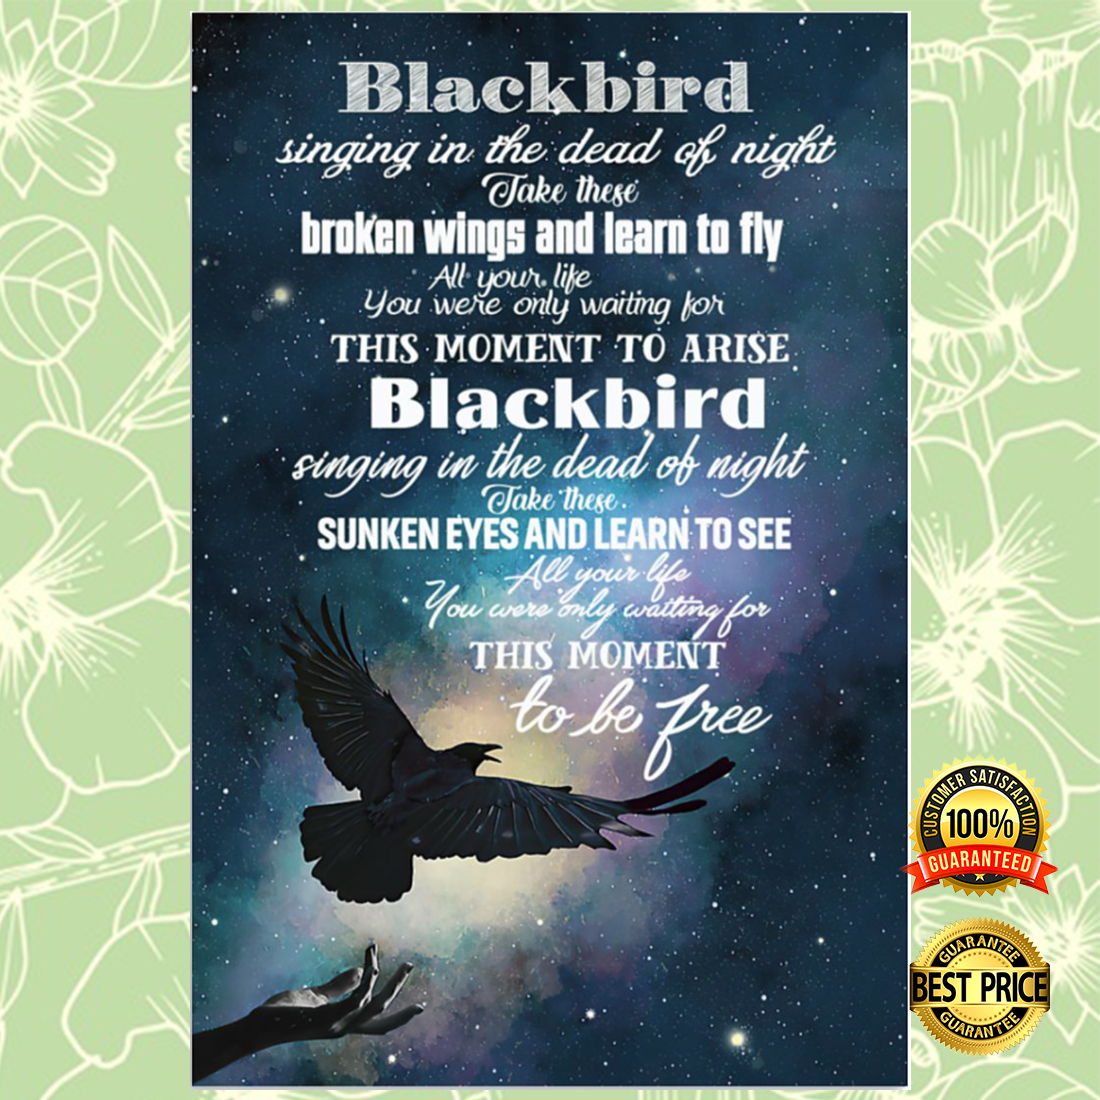 Blackbird singing in the dead of night take these broken wings and learn to fly poster 5